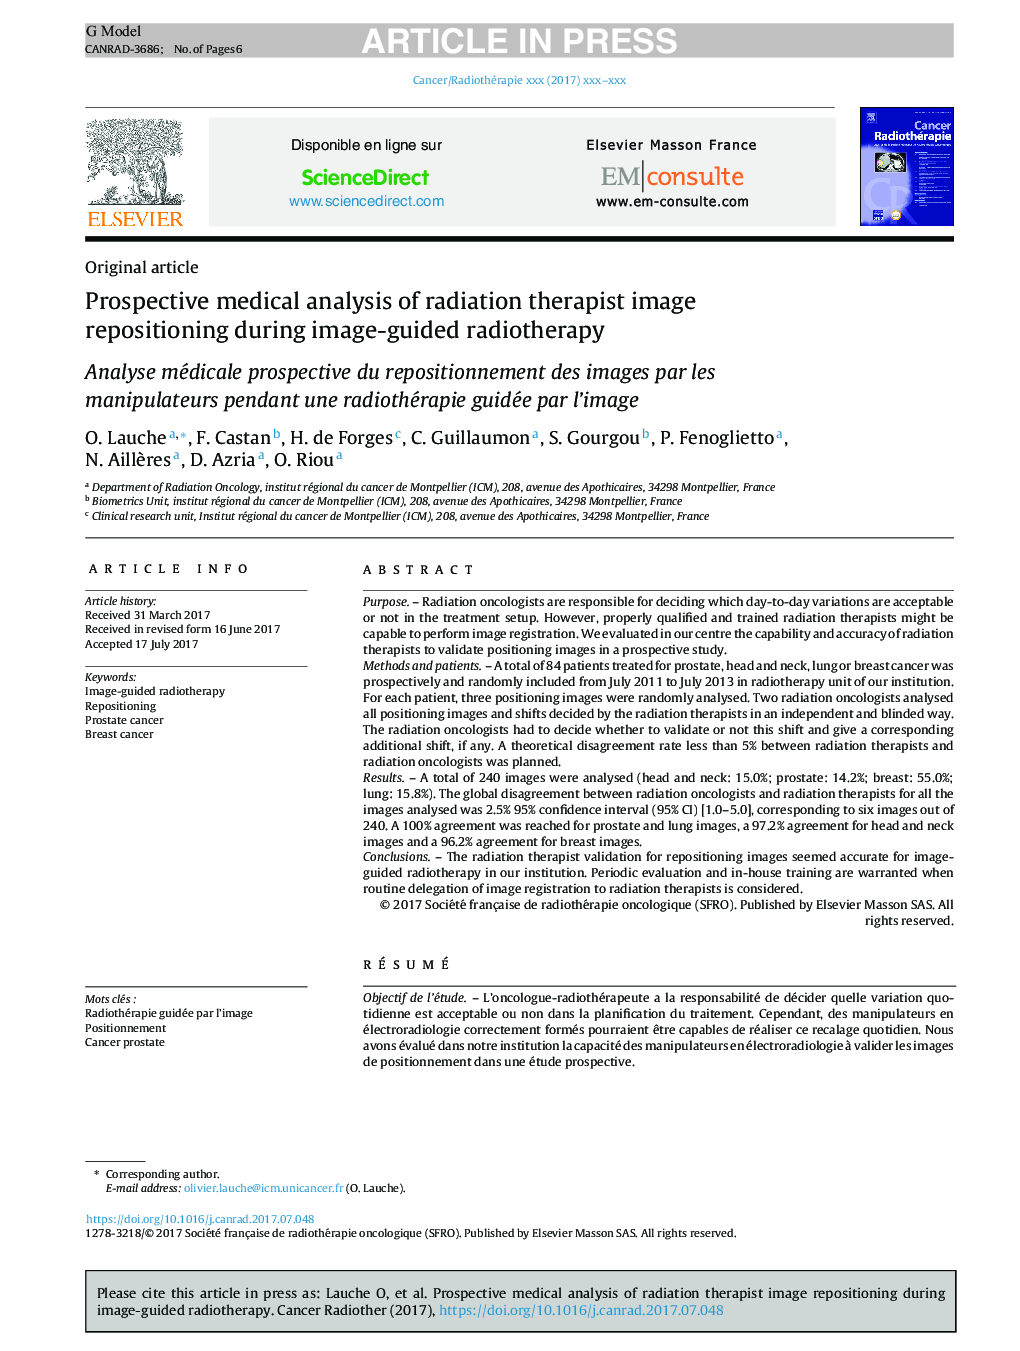 Prospective medical analysis of radiation therapist image repositioning during image-guided radiotherapy